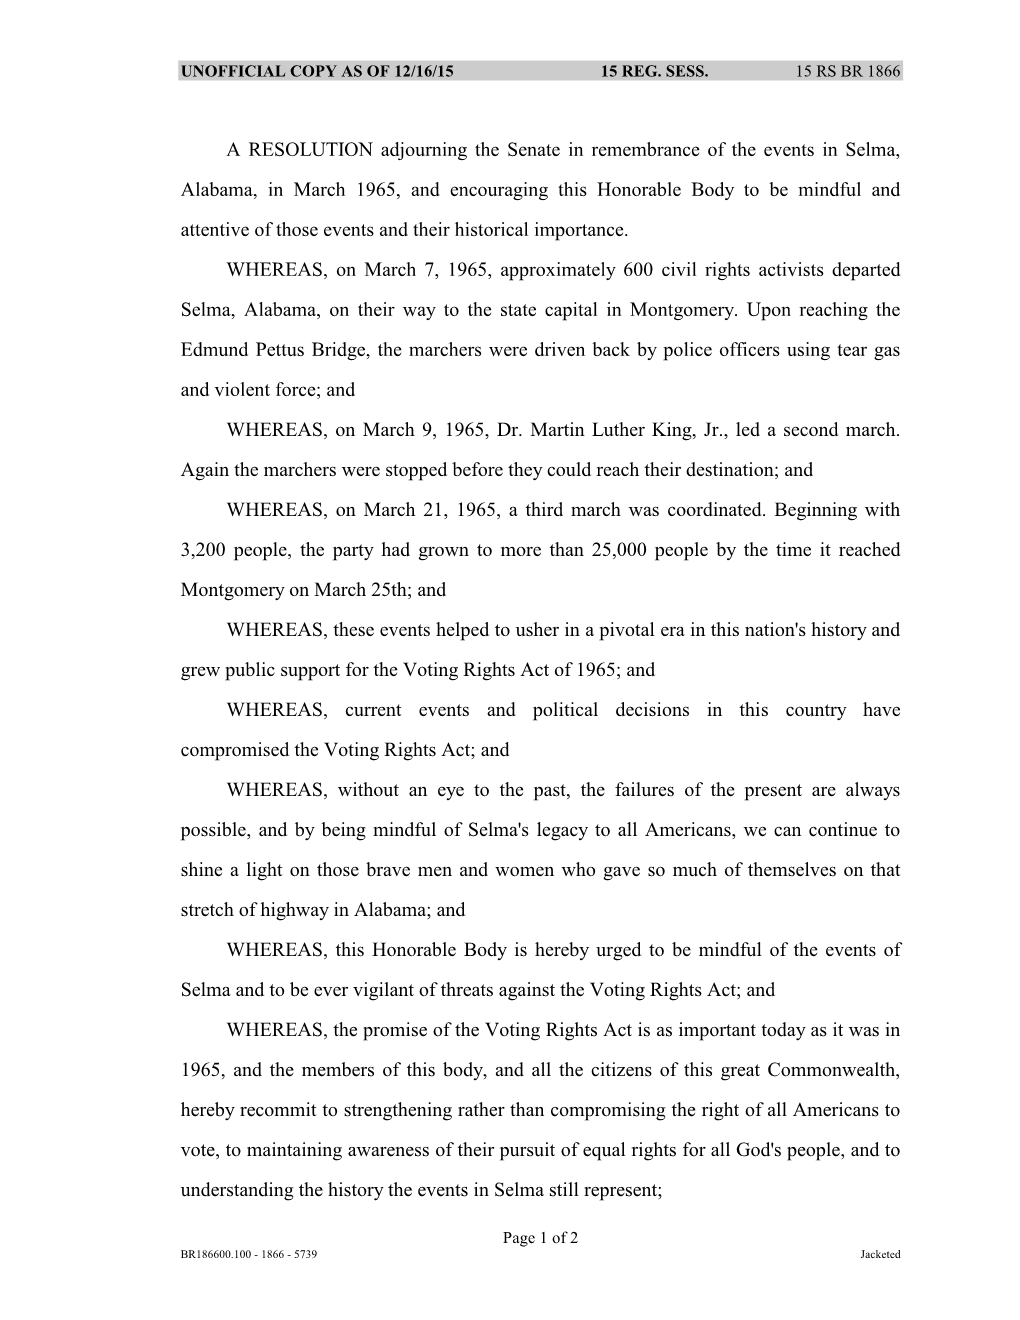 A RESOLUTION Adjourning the Senate in Remembrance of the Events in Selma, Alabama, in March 1965, and Encouraging This Honorable